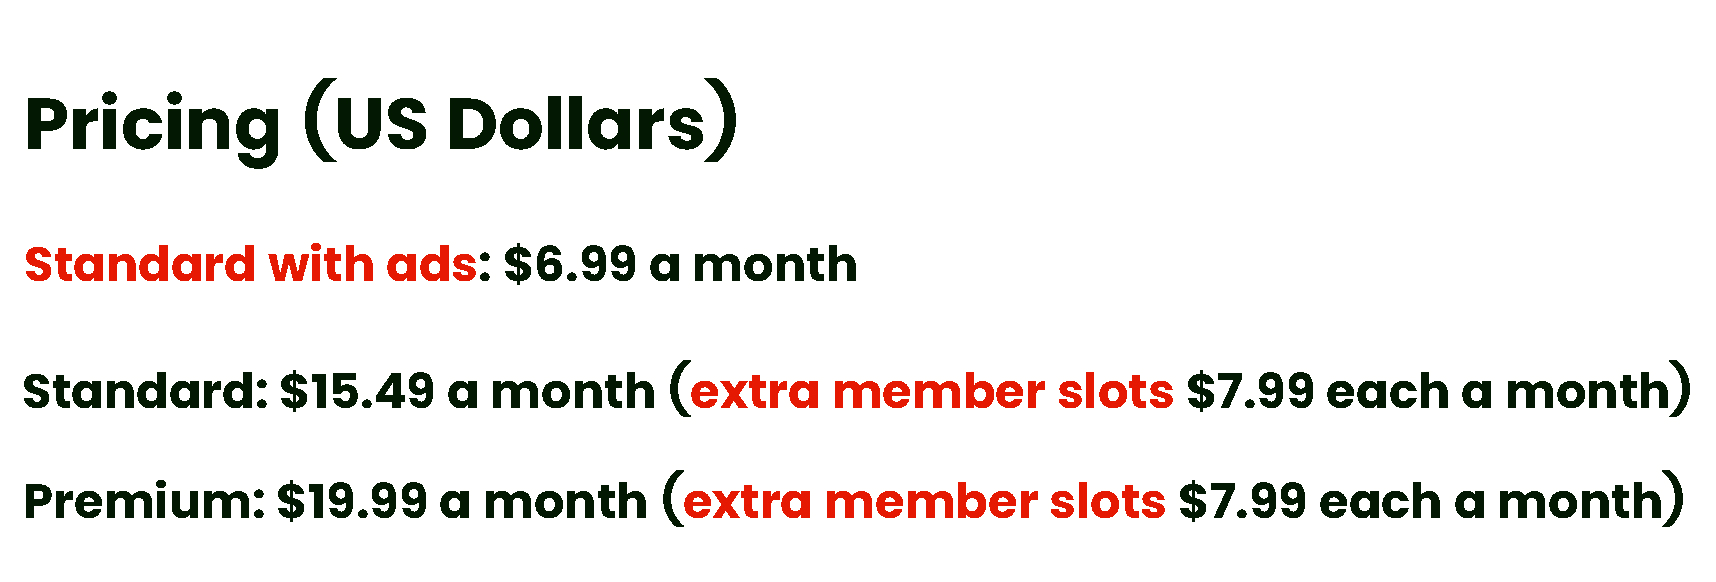 Ad supported tier extra member accounts Netflix Extra member fee costs $7.99 each